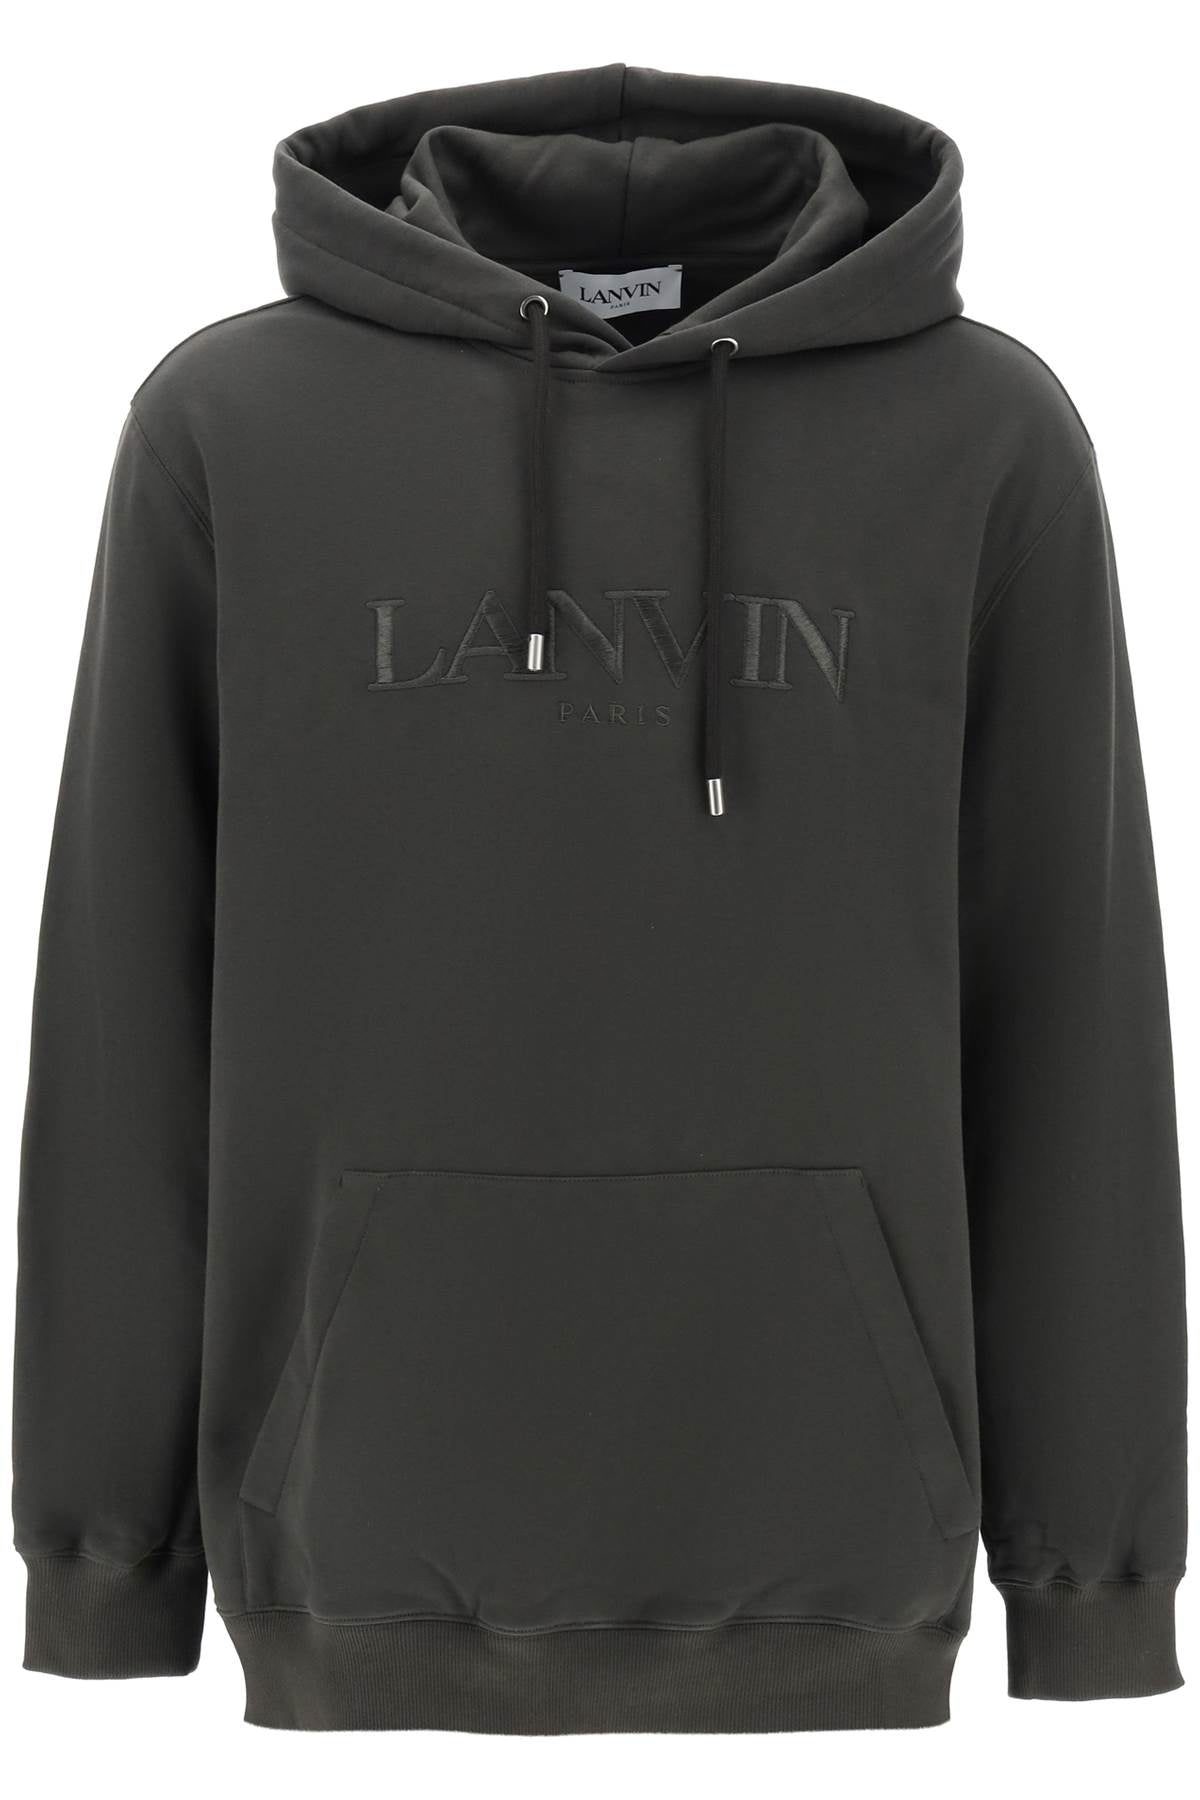 Lanvin hoodie with curb embroidery-0